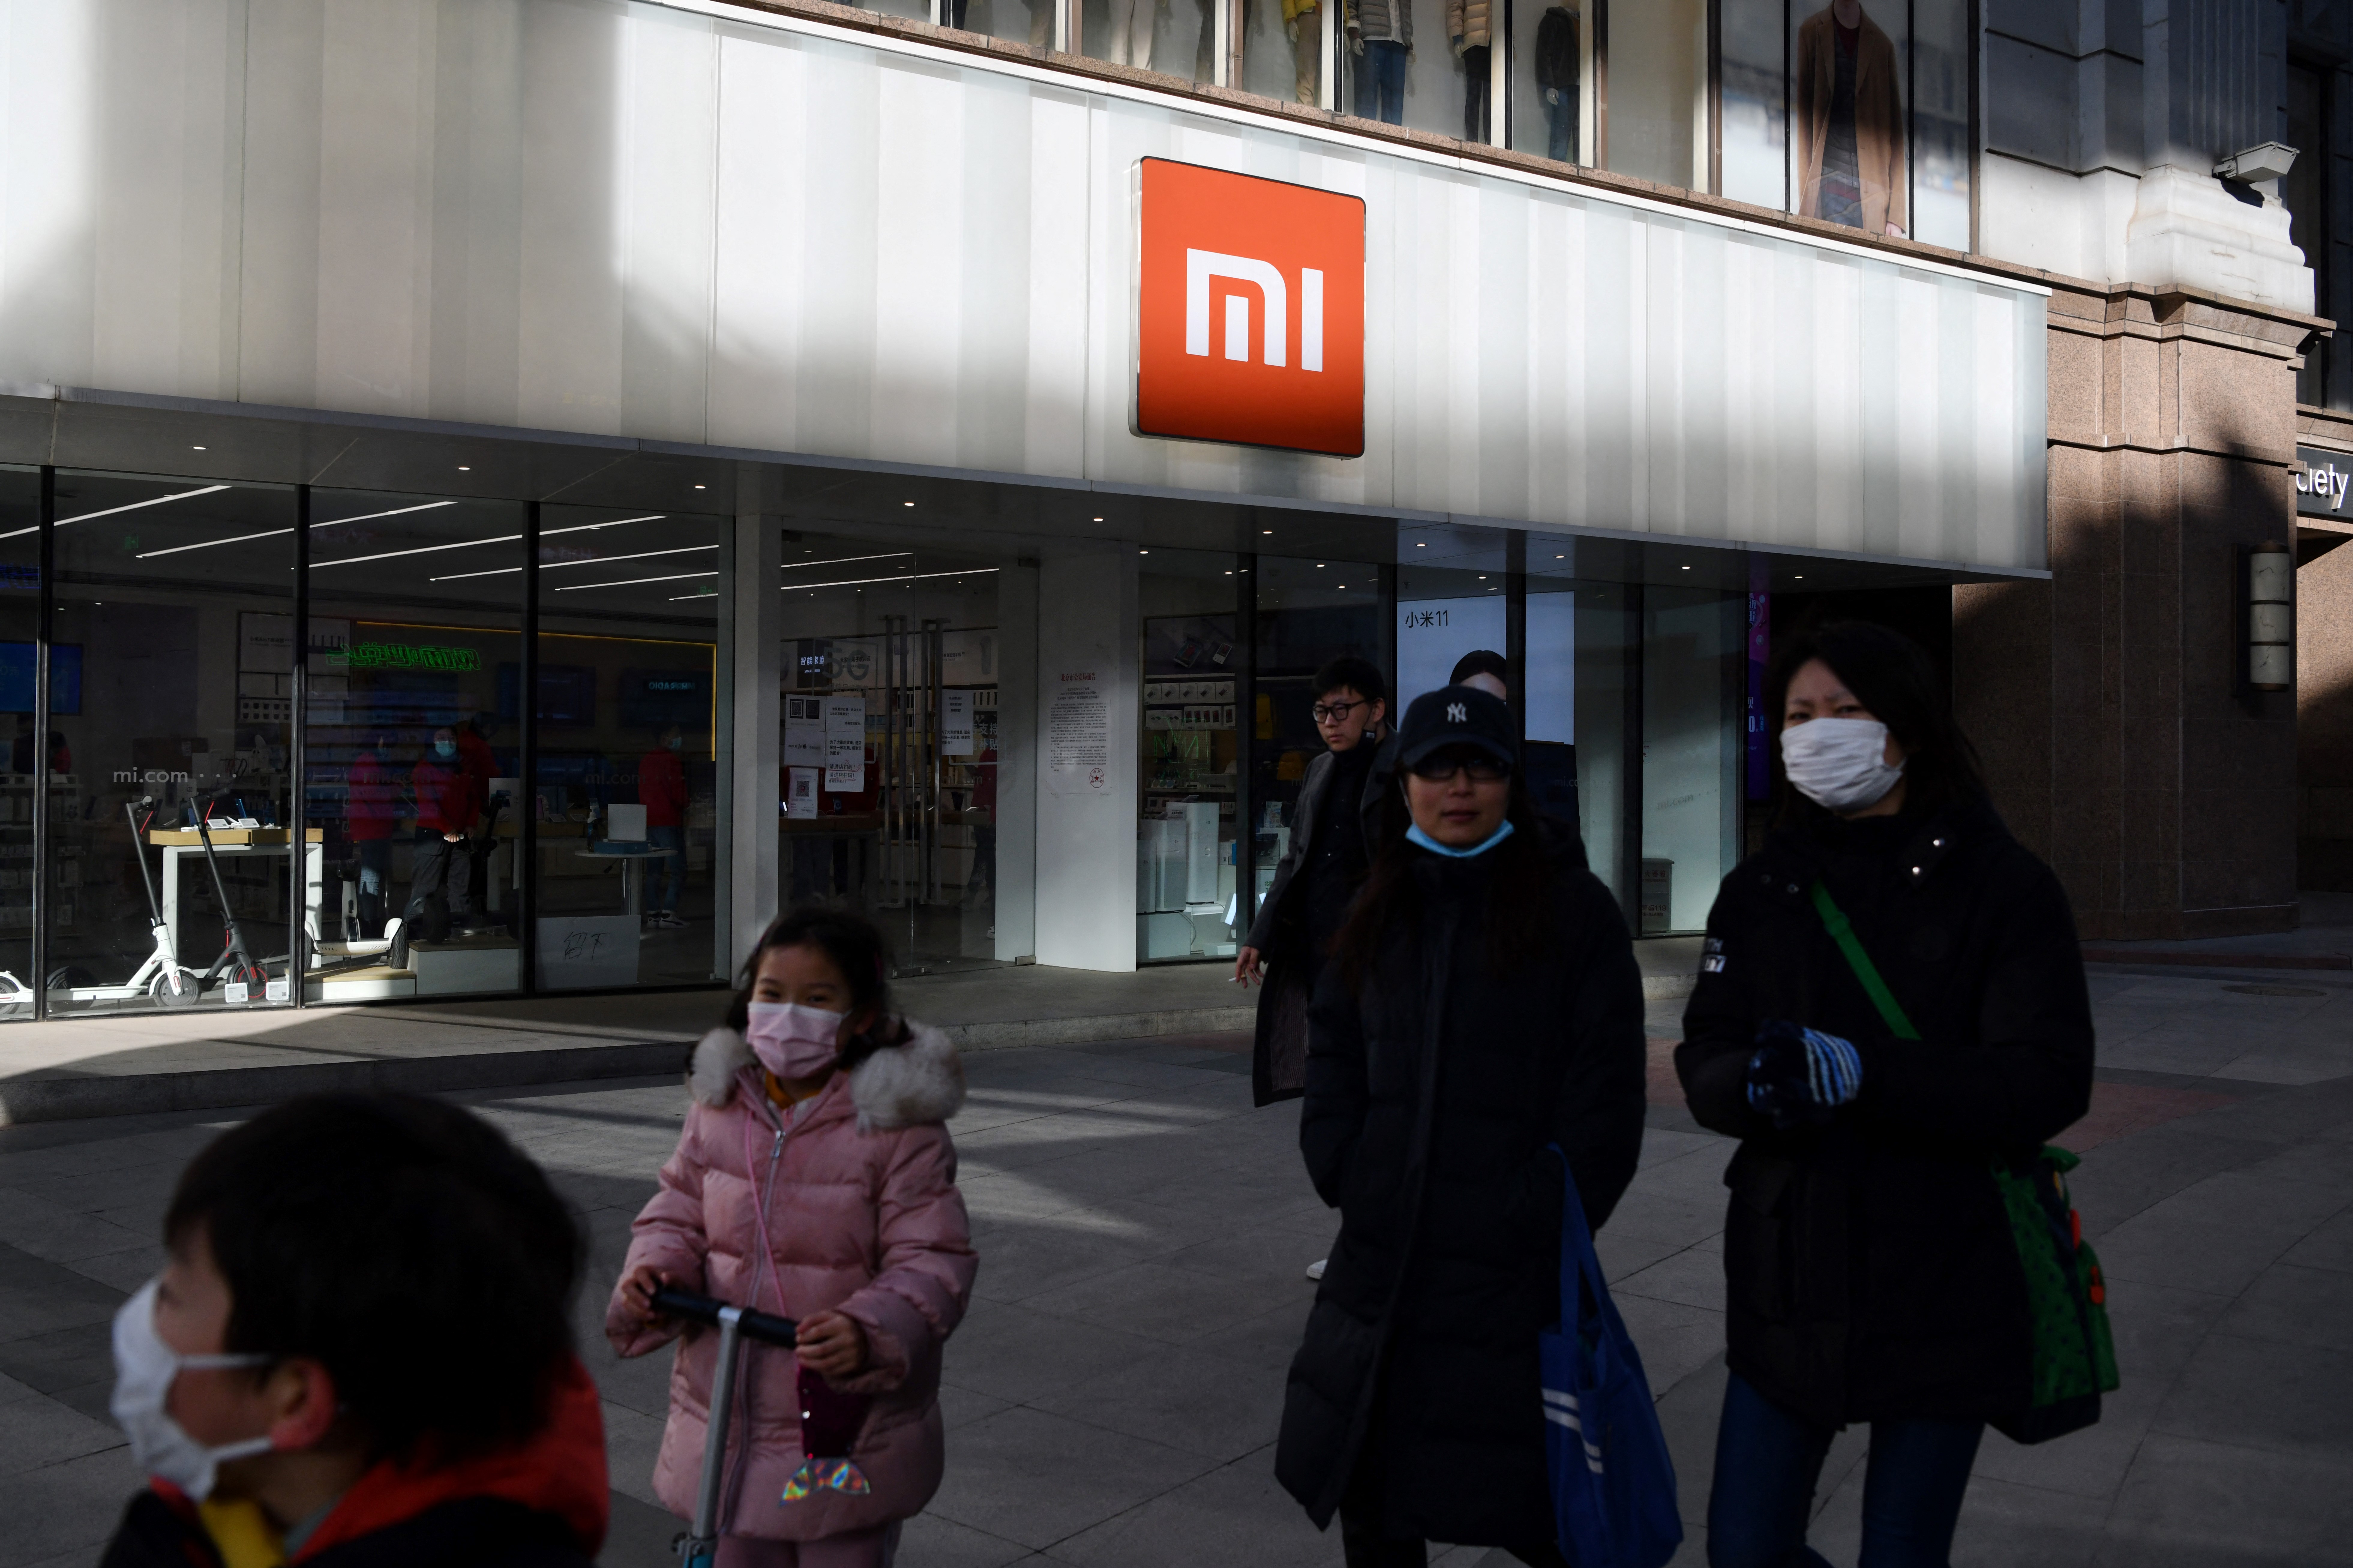 People walk past a Xiaomi store in Beijing, China on January 15, 2021, as shares in the company collapsed on January 15 after the United States blacklisted the smartphone giant and a host of other Chinese firms. (Photo by GREG BAKER / AFP)